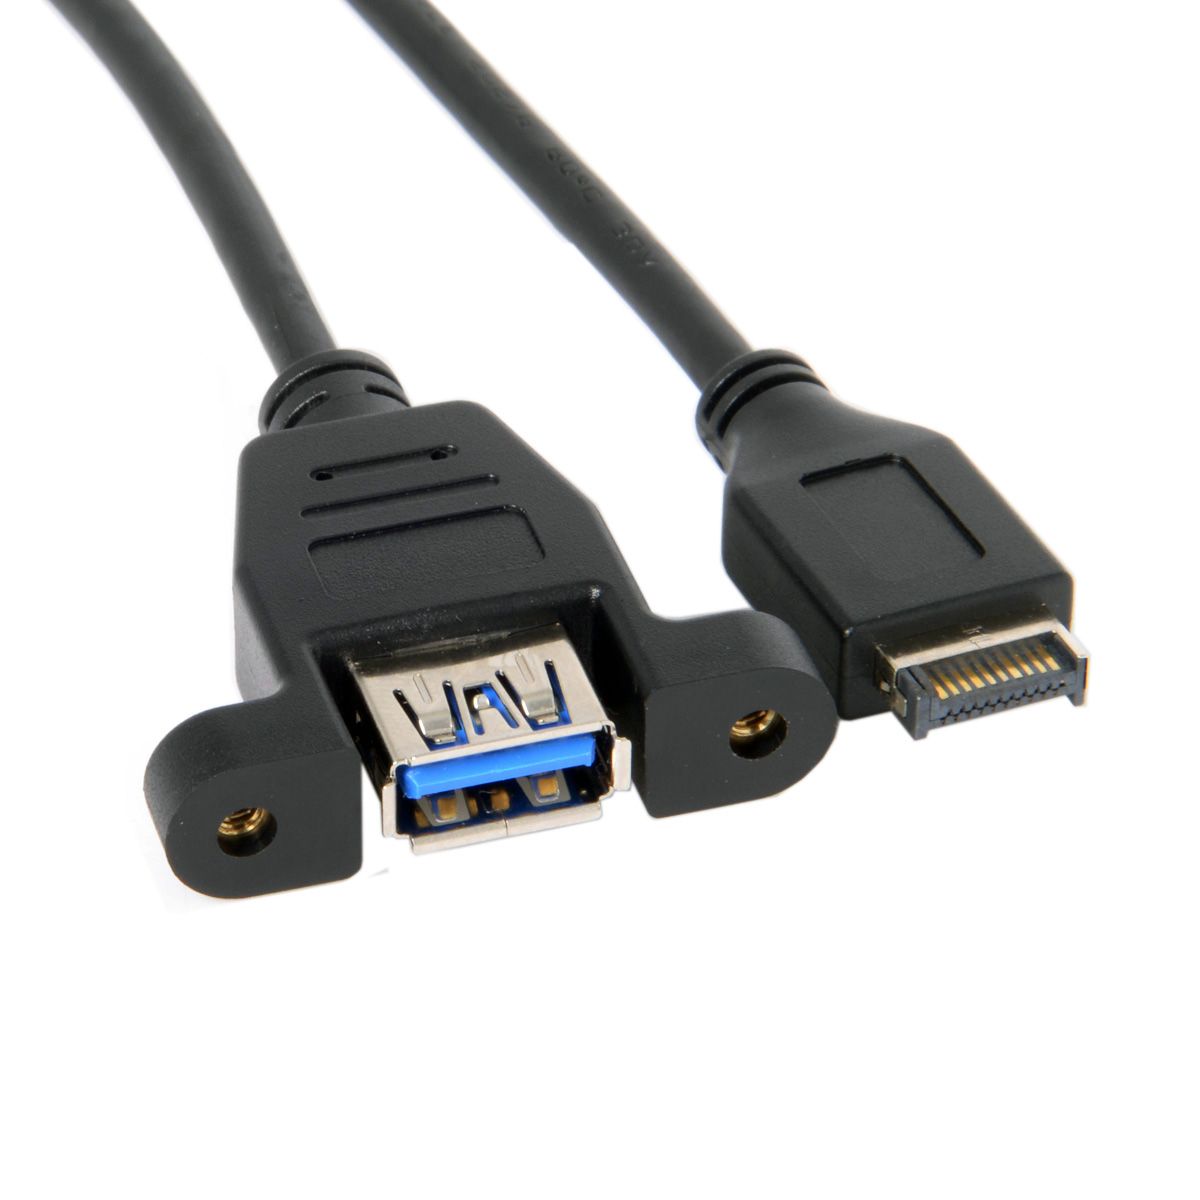 Motherboard Cable USB 3.1 Front Panel Header To USB 3.0 Type A Female  Extension Cable 50cm Panel Mount Type From Qianyiwo, $31.53